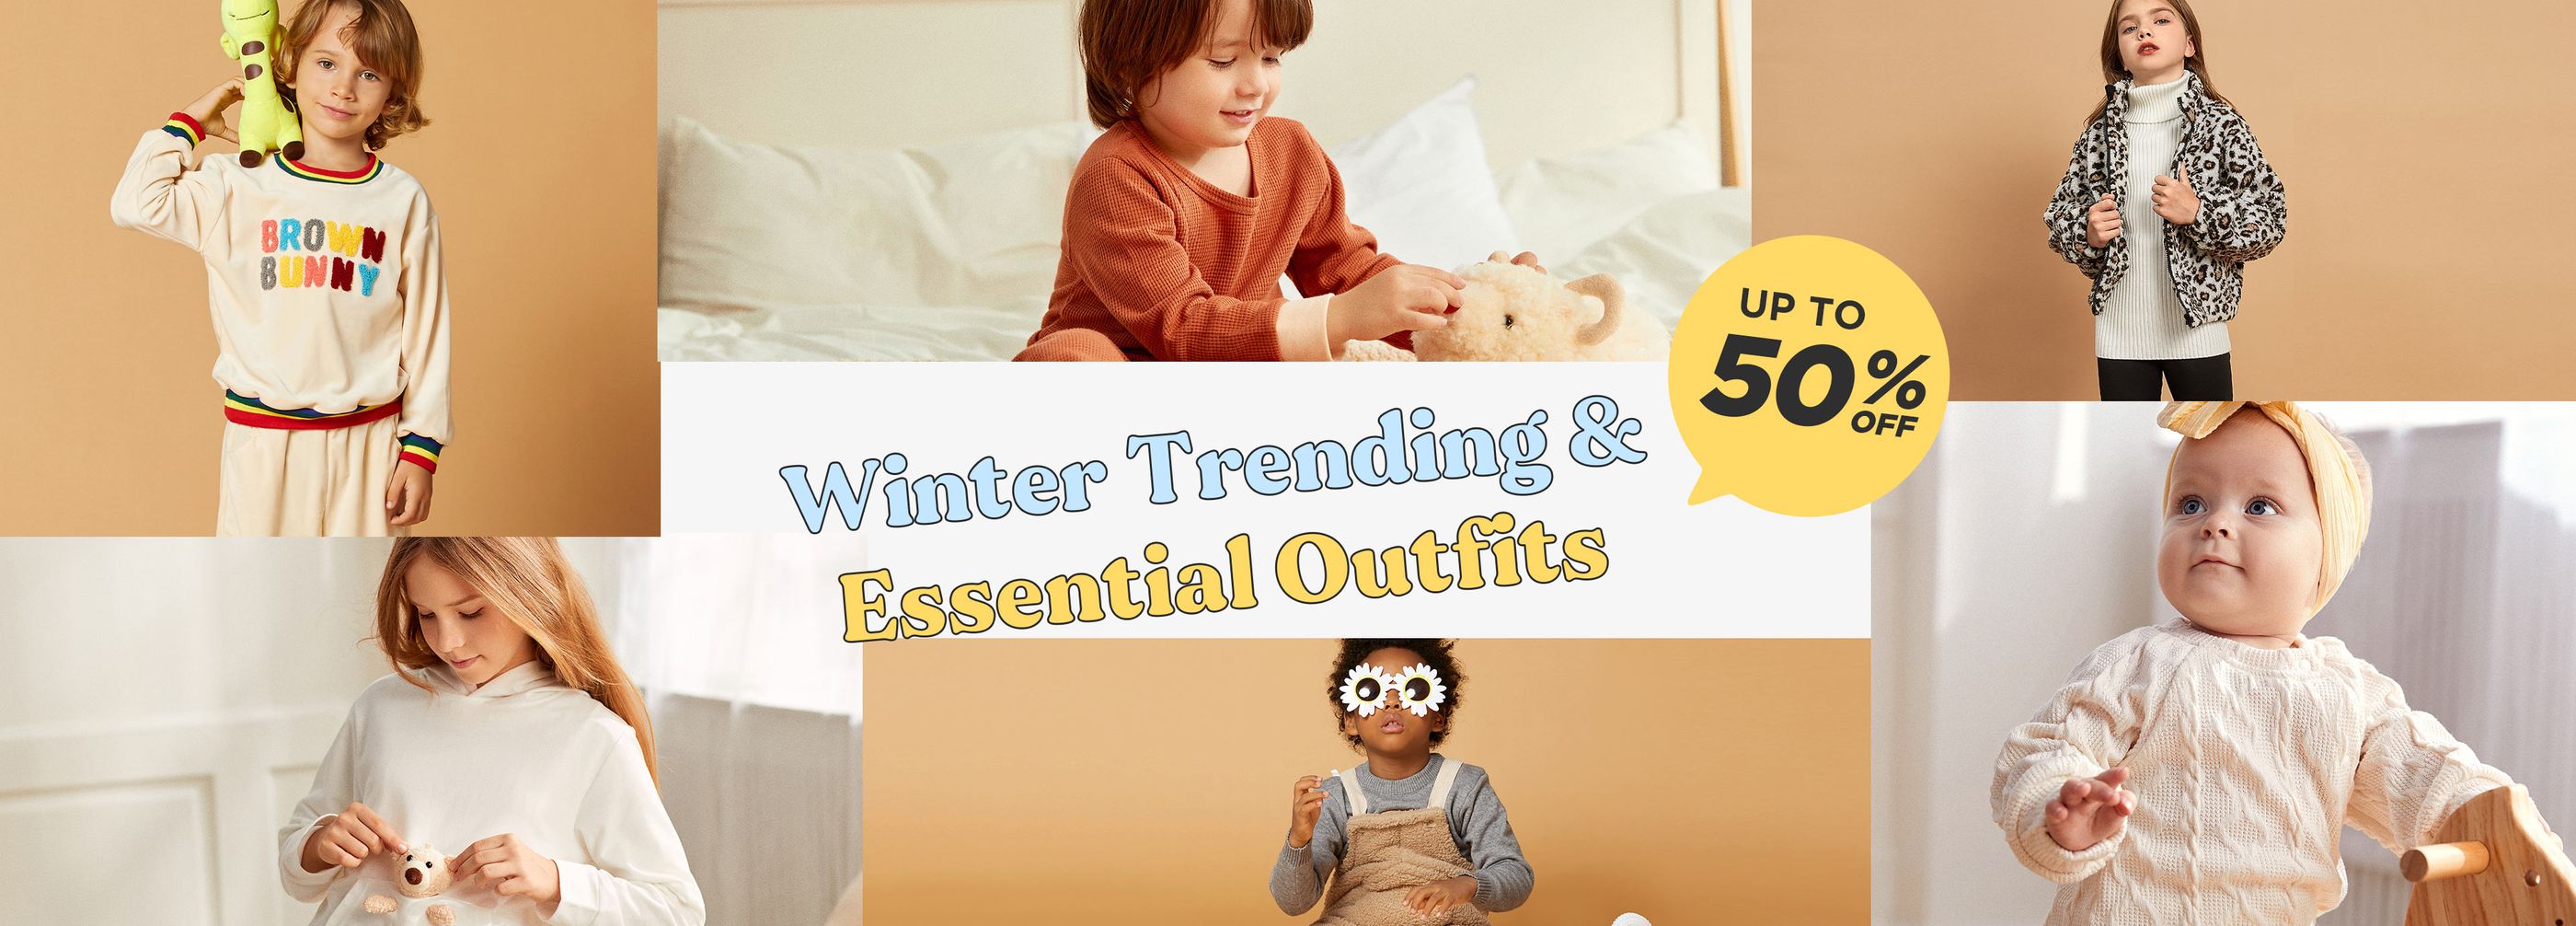 Winter Trending & Essential Outfits